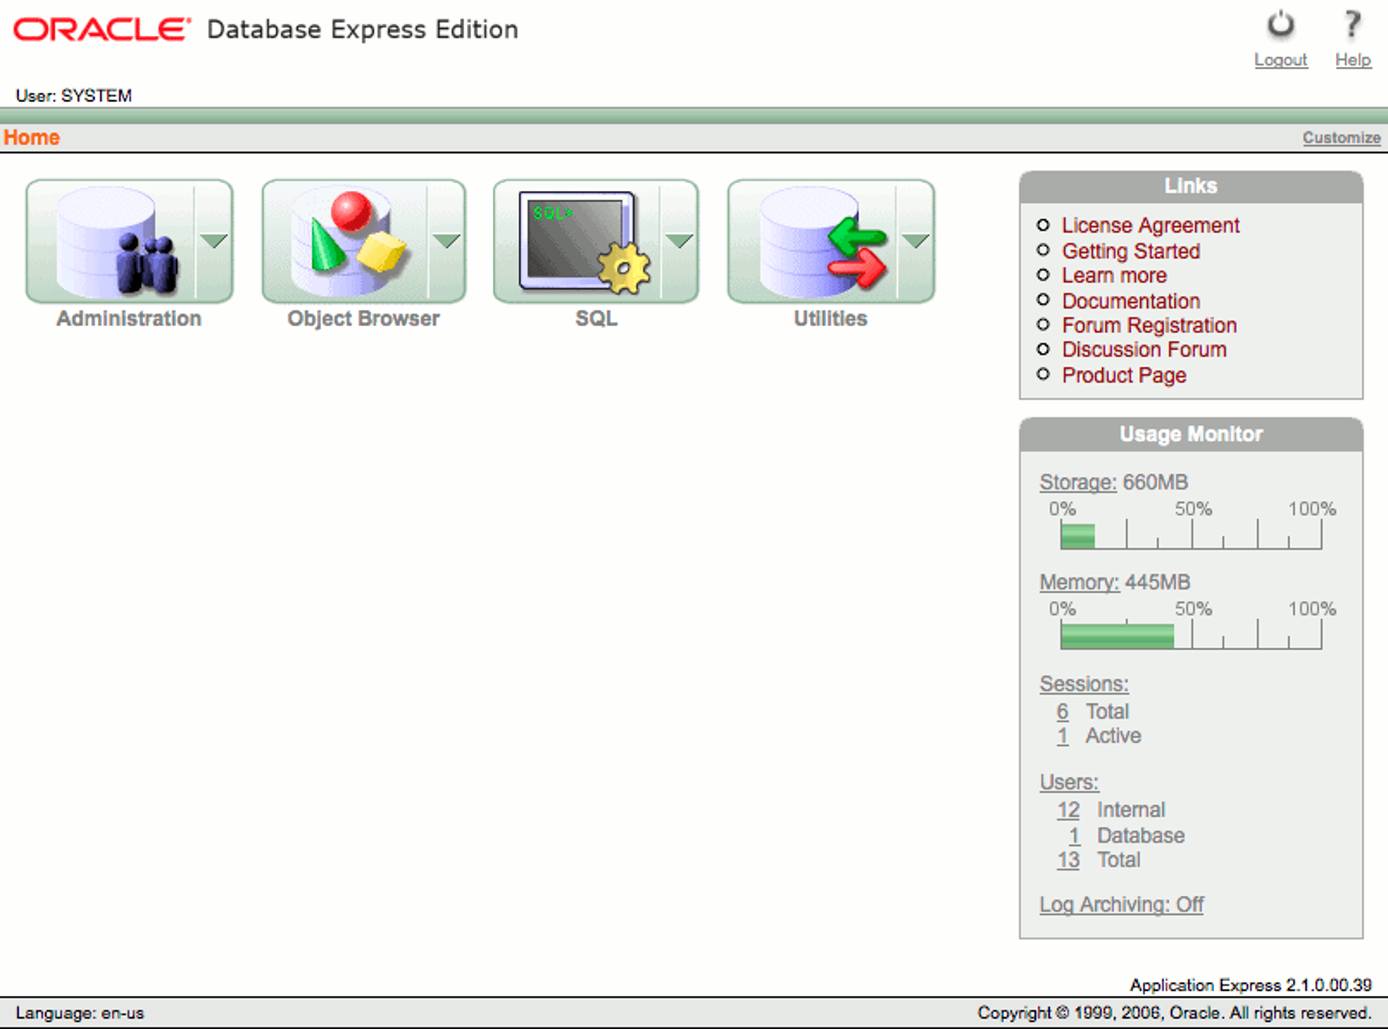 The Oracle XE administration home page.